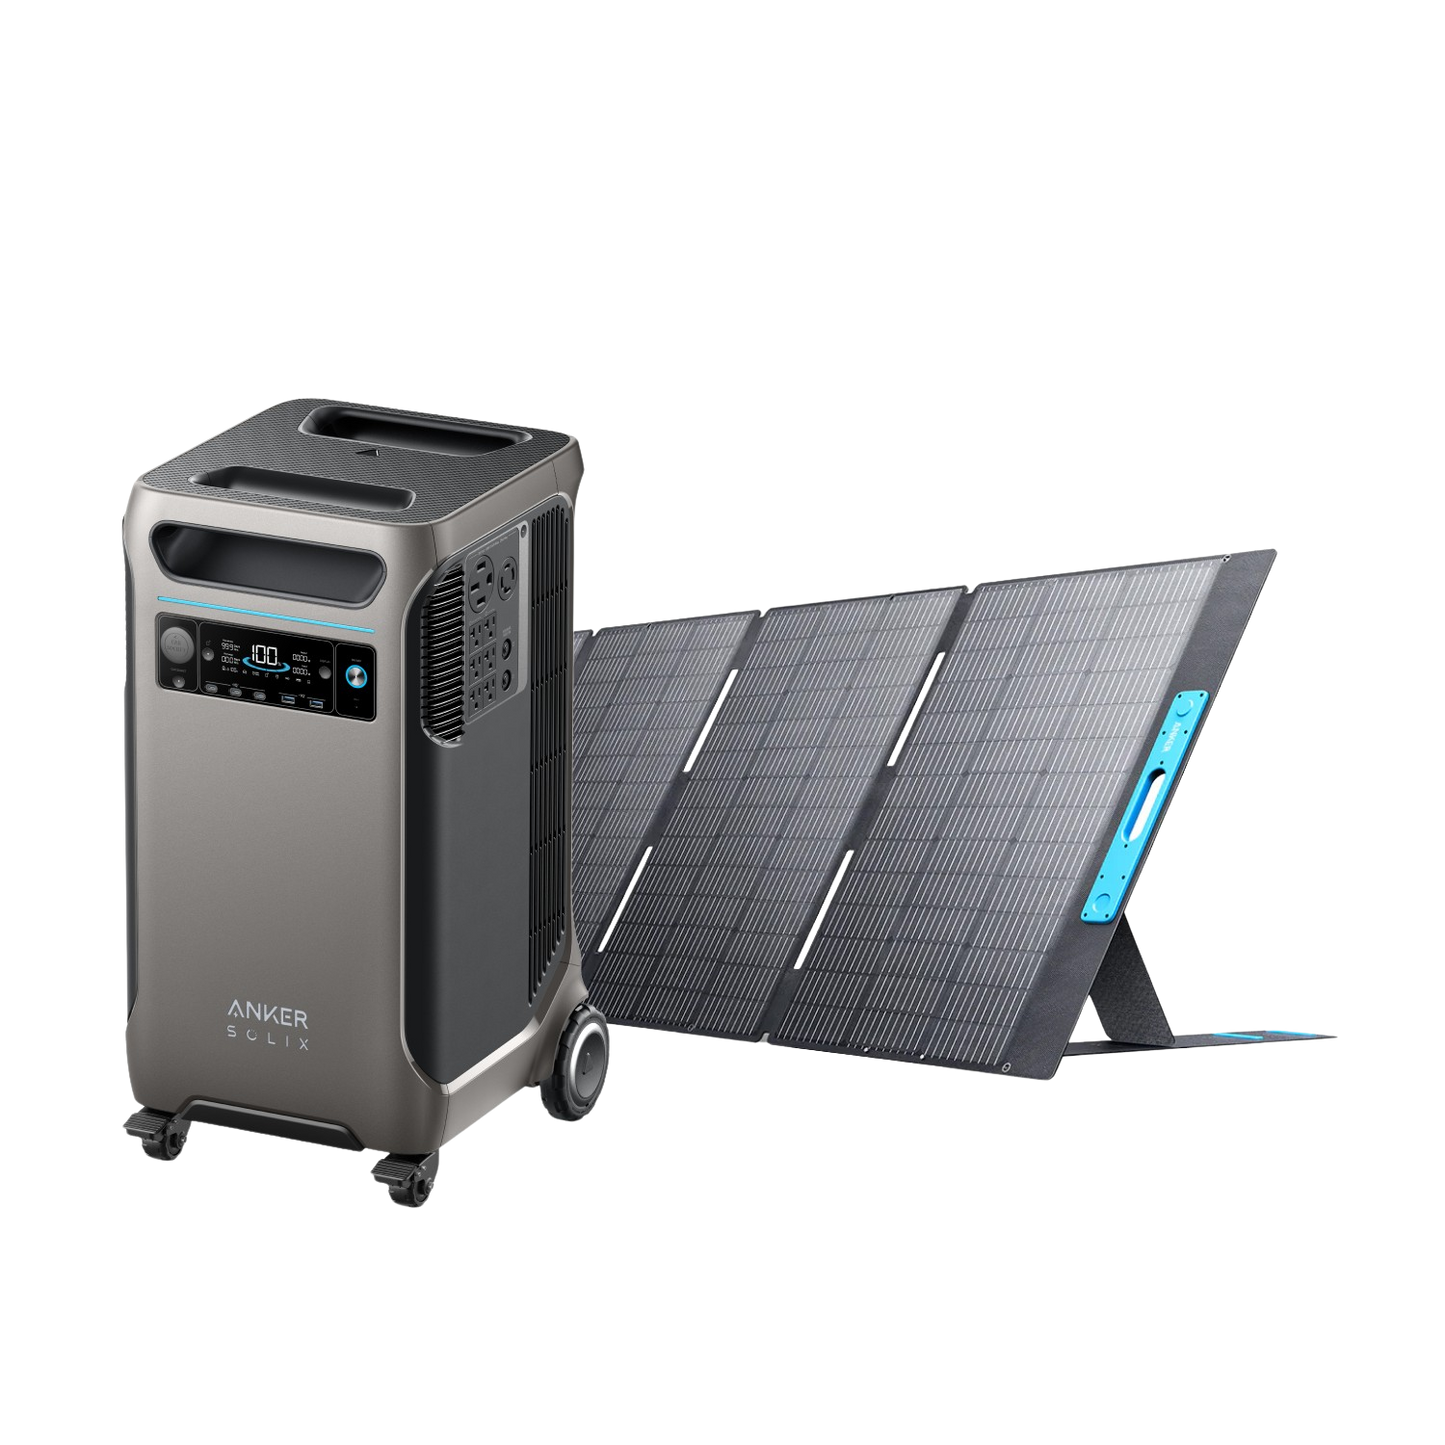 Anker SOLIX F3800, 3.84kWh Capacity Portable Power Stations